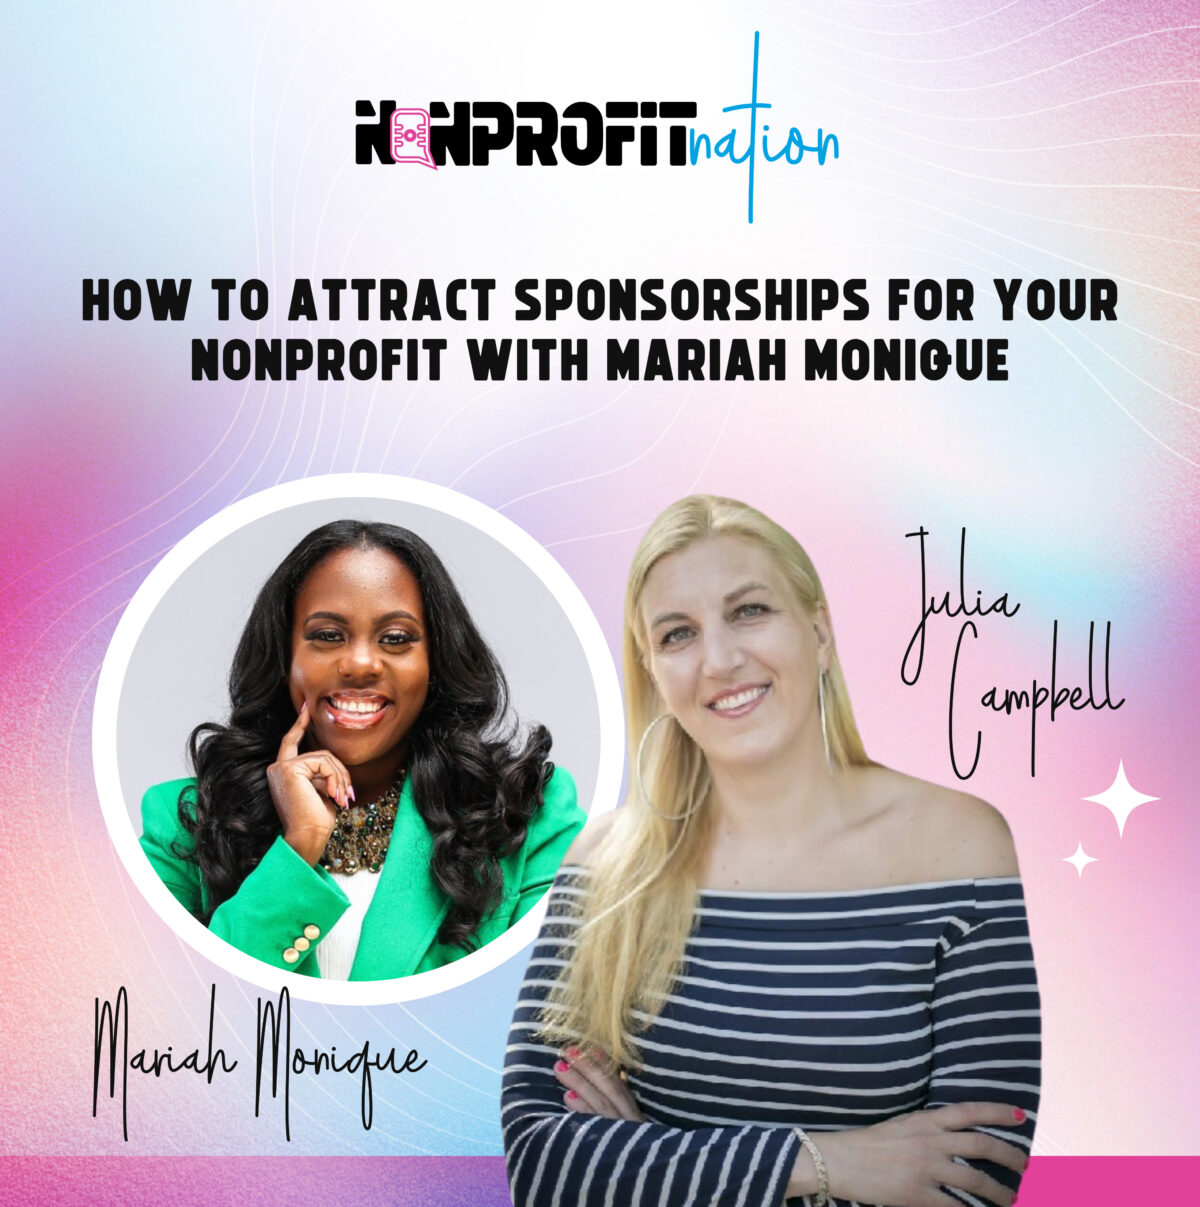 How to Attract Sponsorships for Your Nonprofit with Mariah Monique